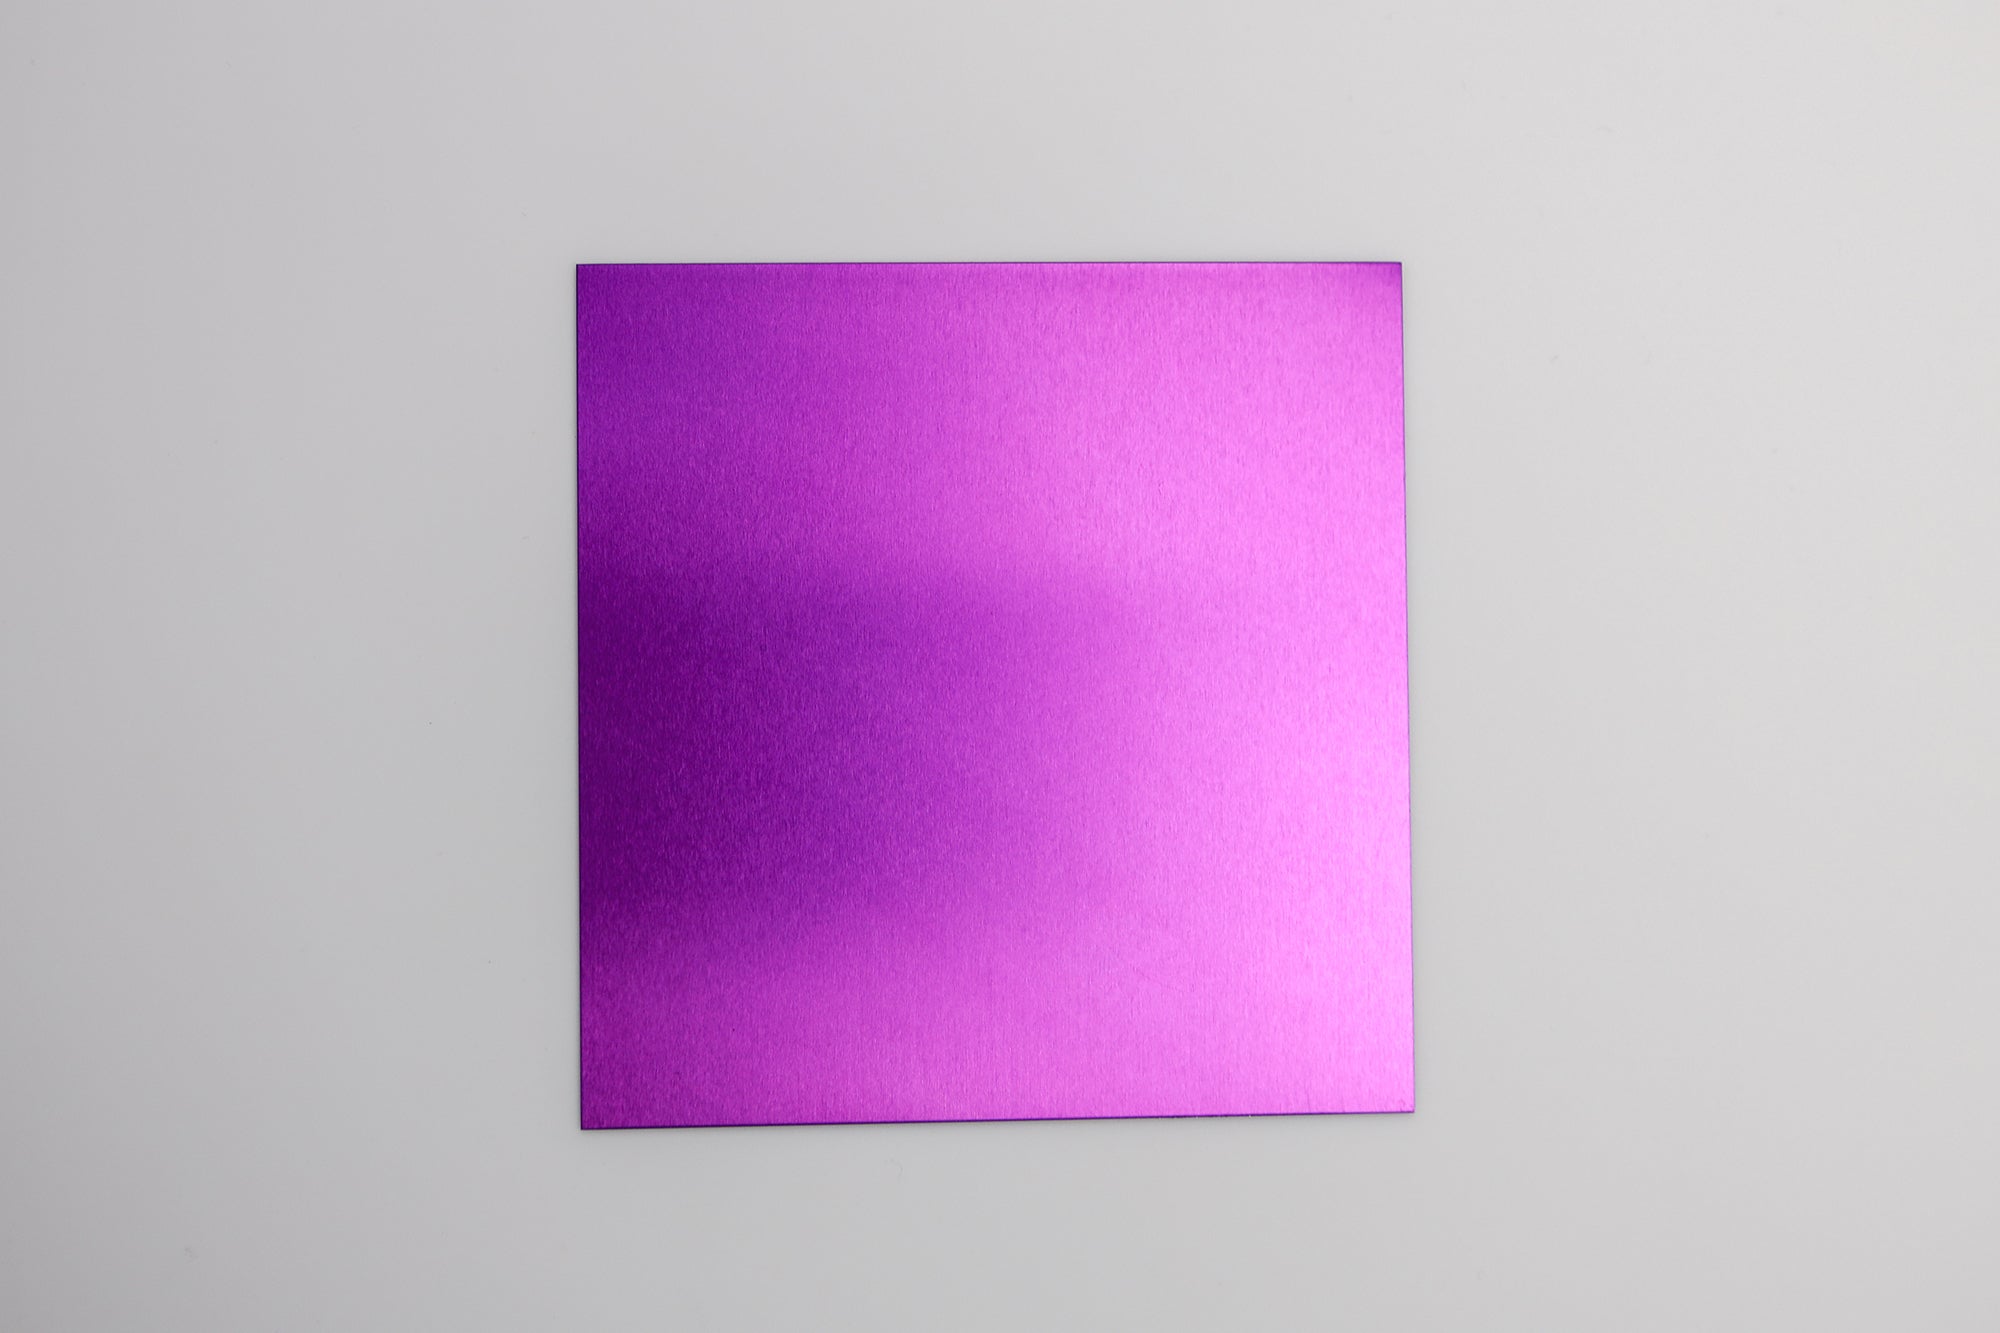 Indoor Anodised Aluminium Sheet Purple 570W x 390H x 0.5mm or 1mm Thickness